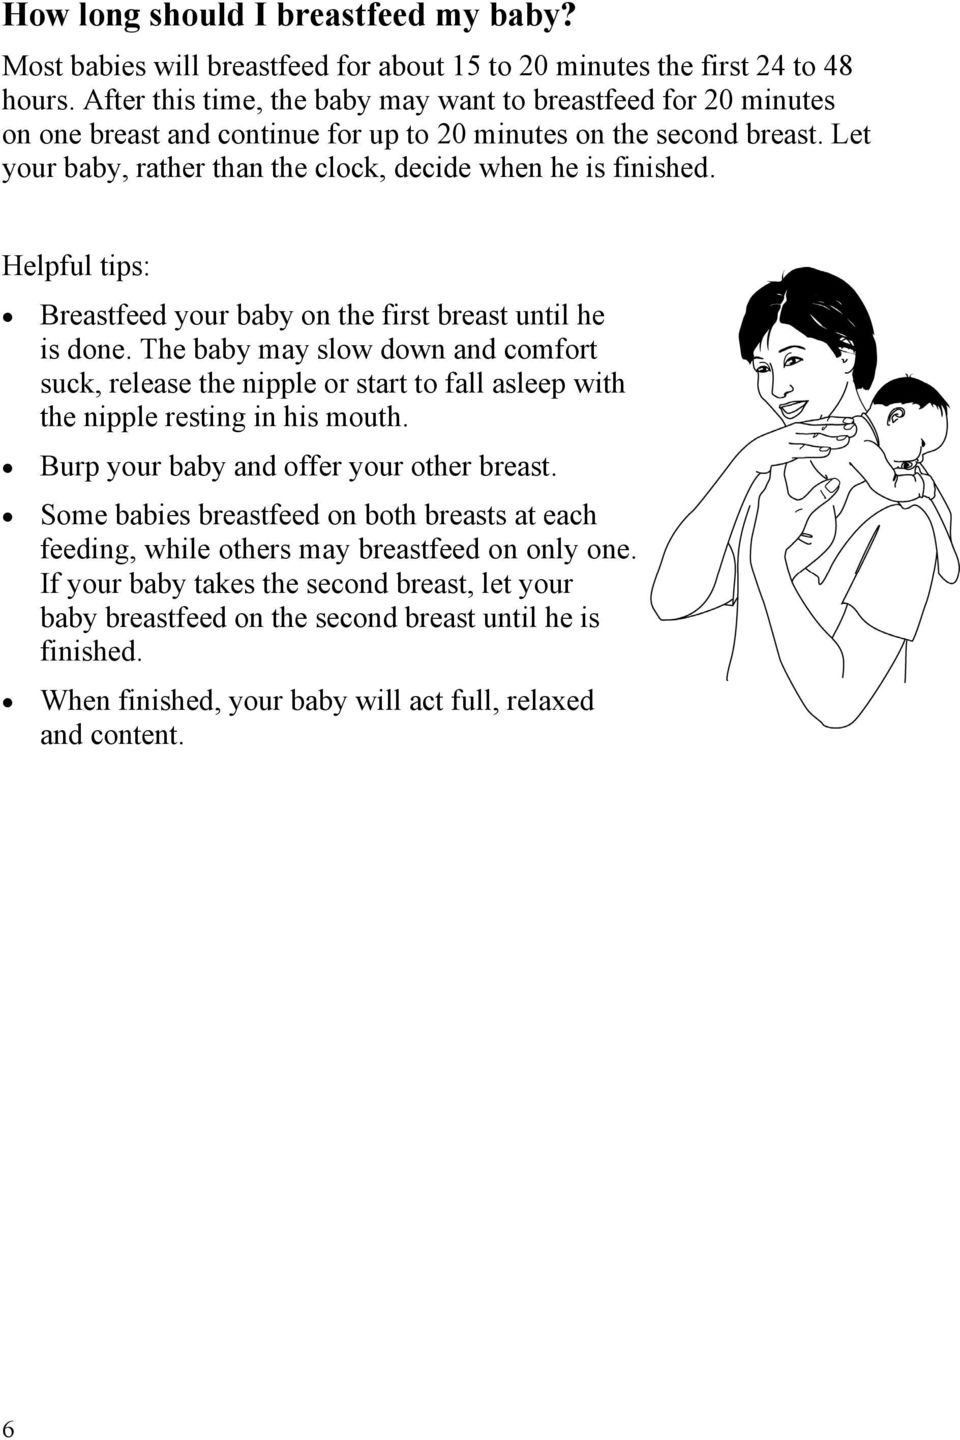 Helpful tips: Breastfeed your baby on the first breast until he is done. The baby may slow down and comfort suck, release the nipple or start to fall asleep with the nipple resting in his mouth.